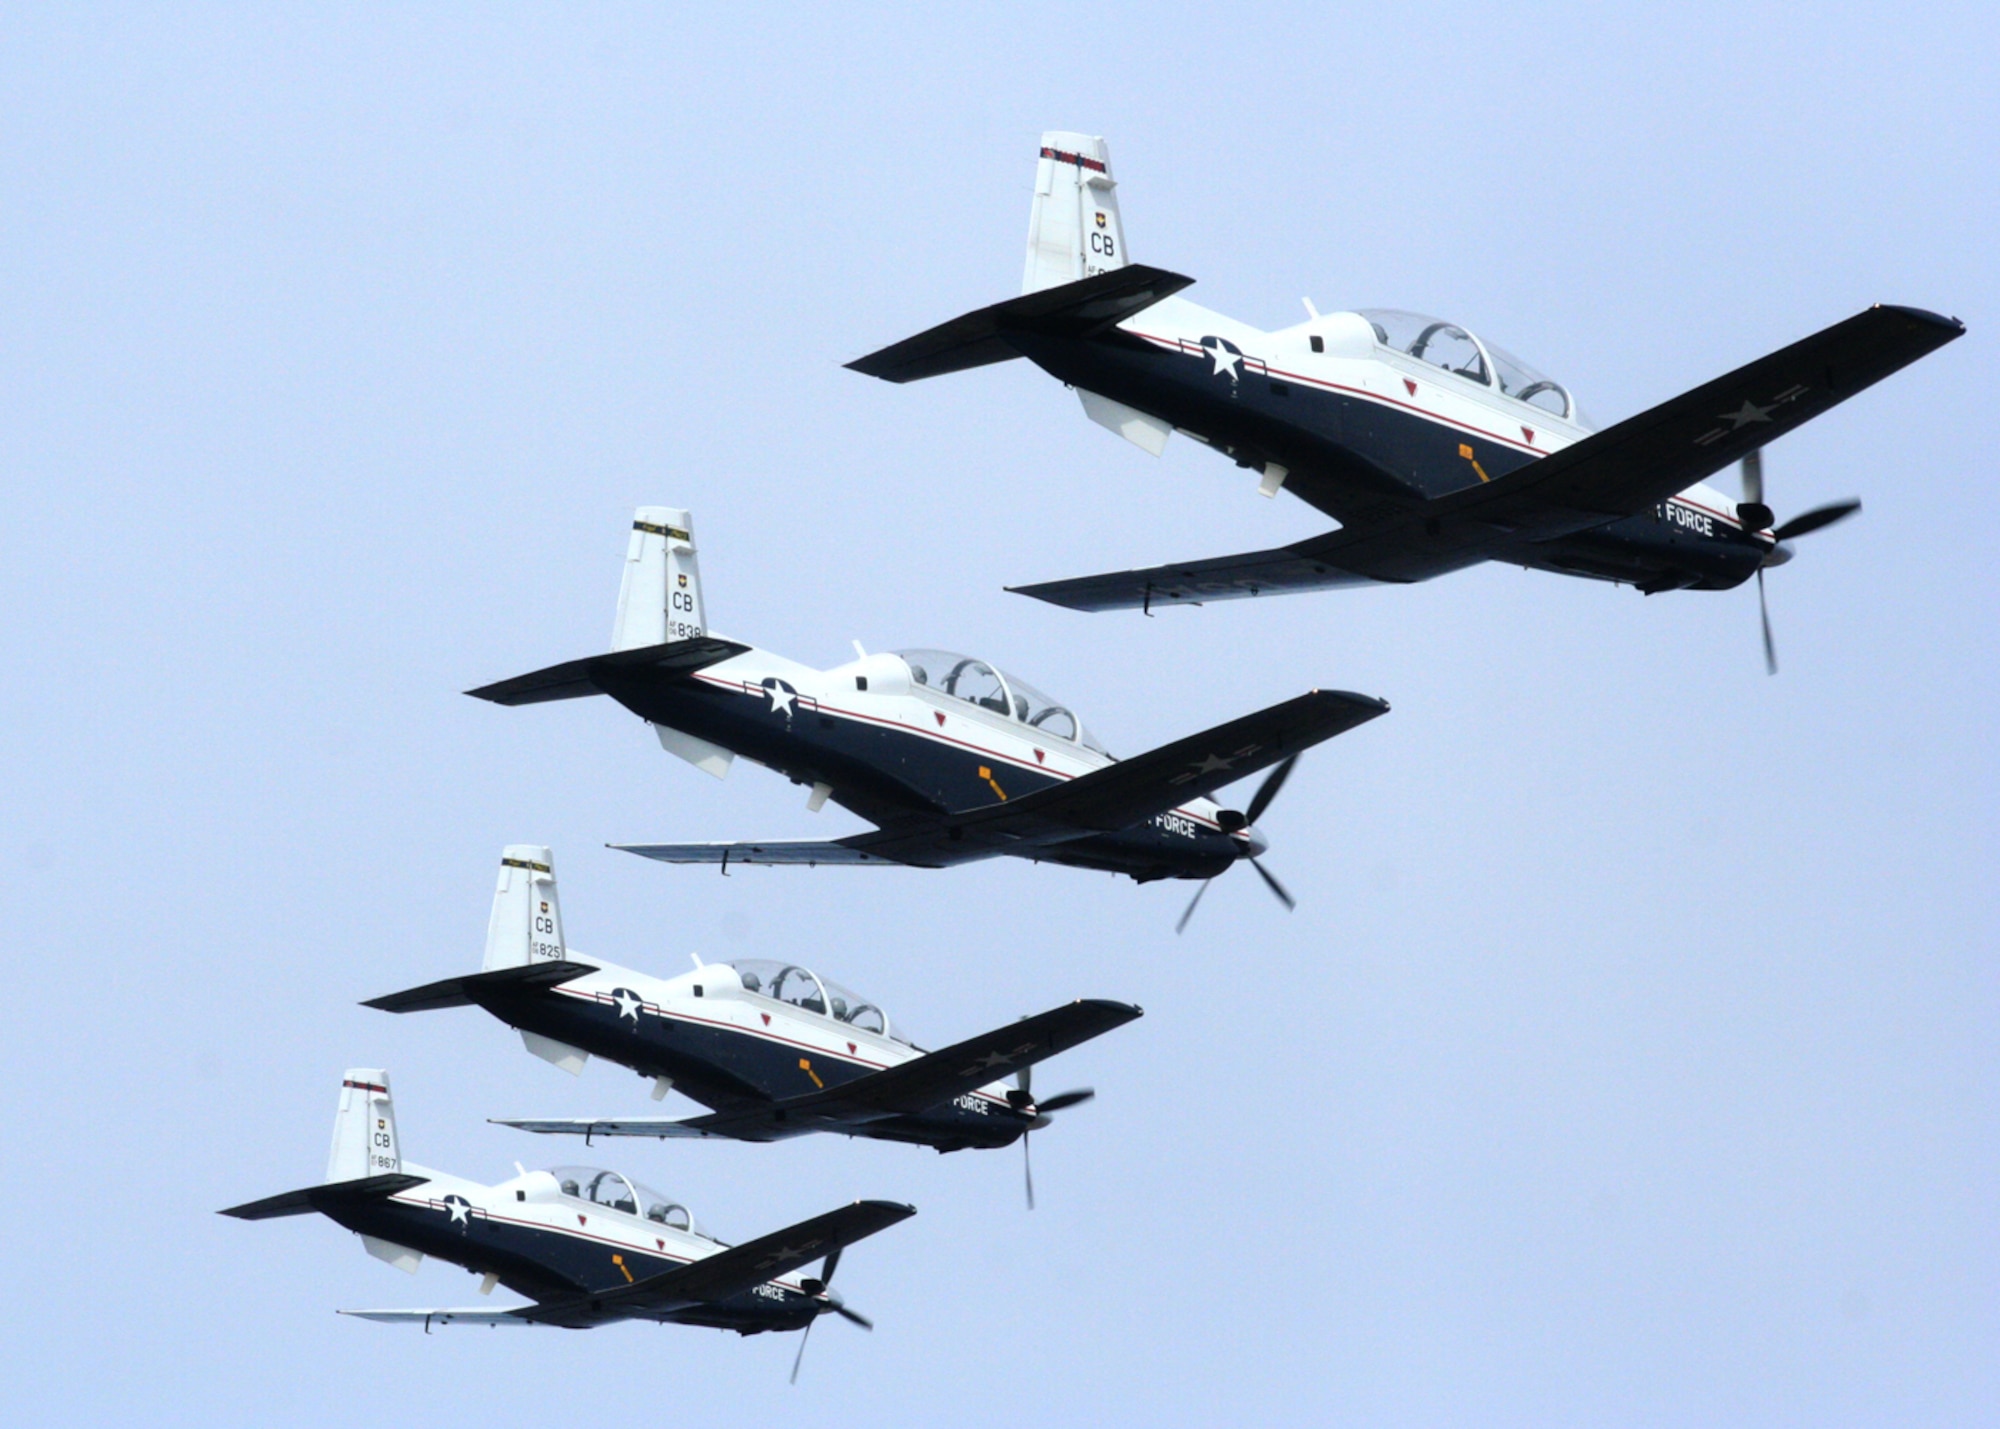 The T-6A Texan II is a single-engine, two-seat primary trainer designed to train Joint Primary Pilot Training, or JPPT, students in basic flying skills common to U.S. Air Force and Navy pilots.